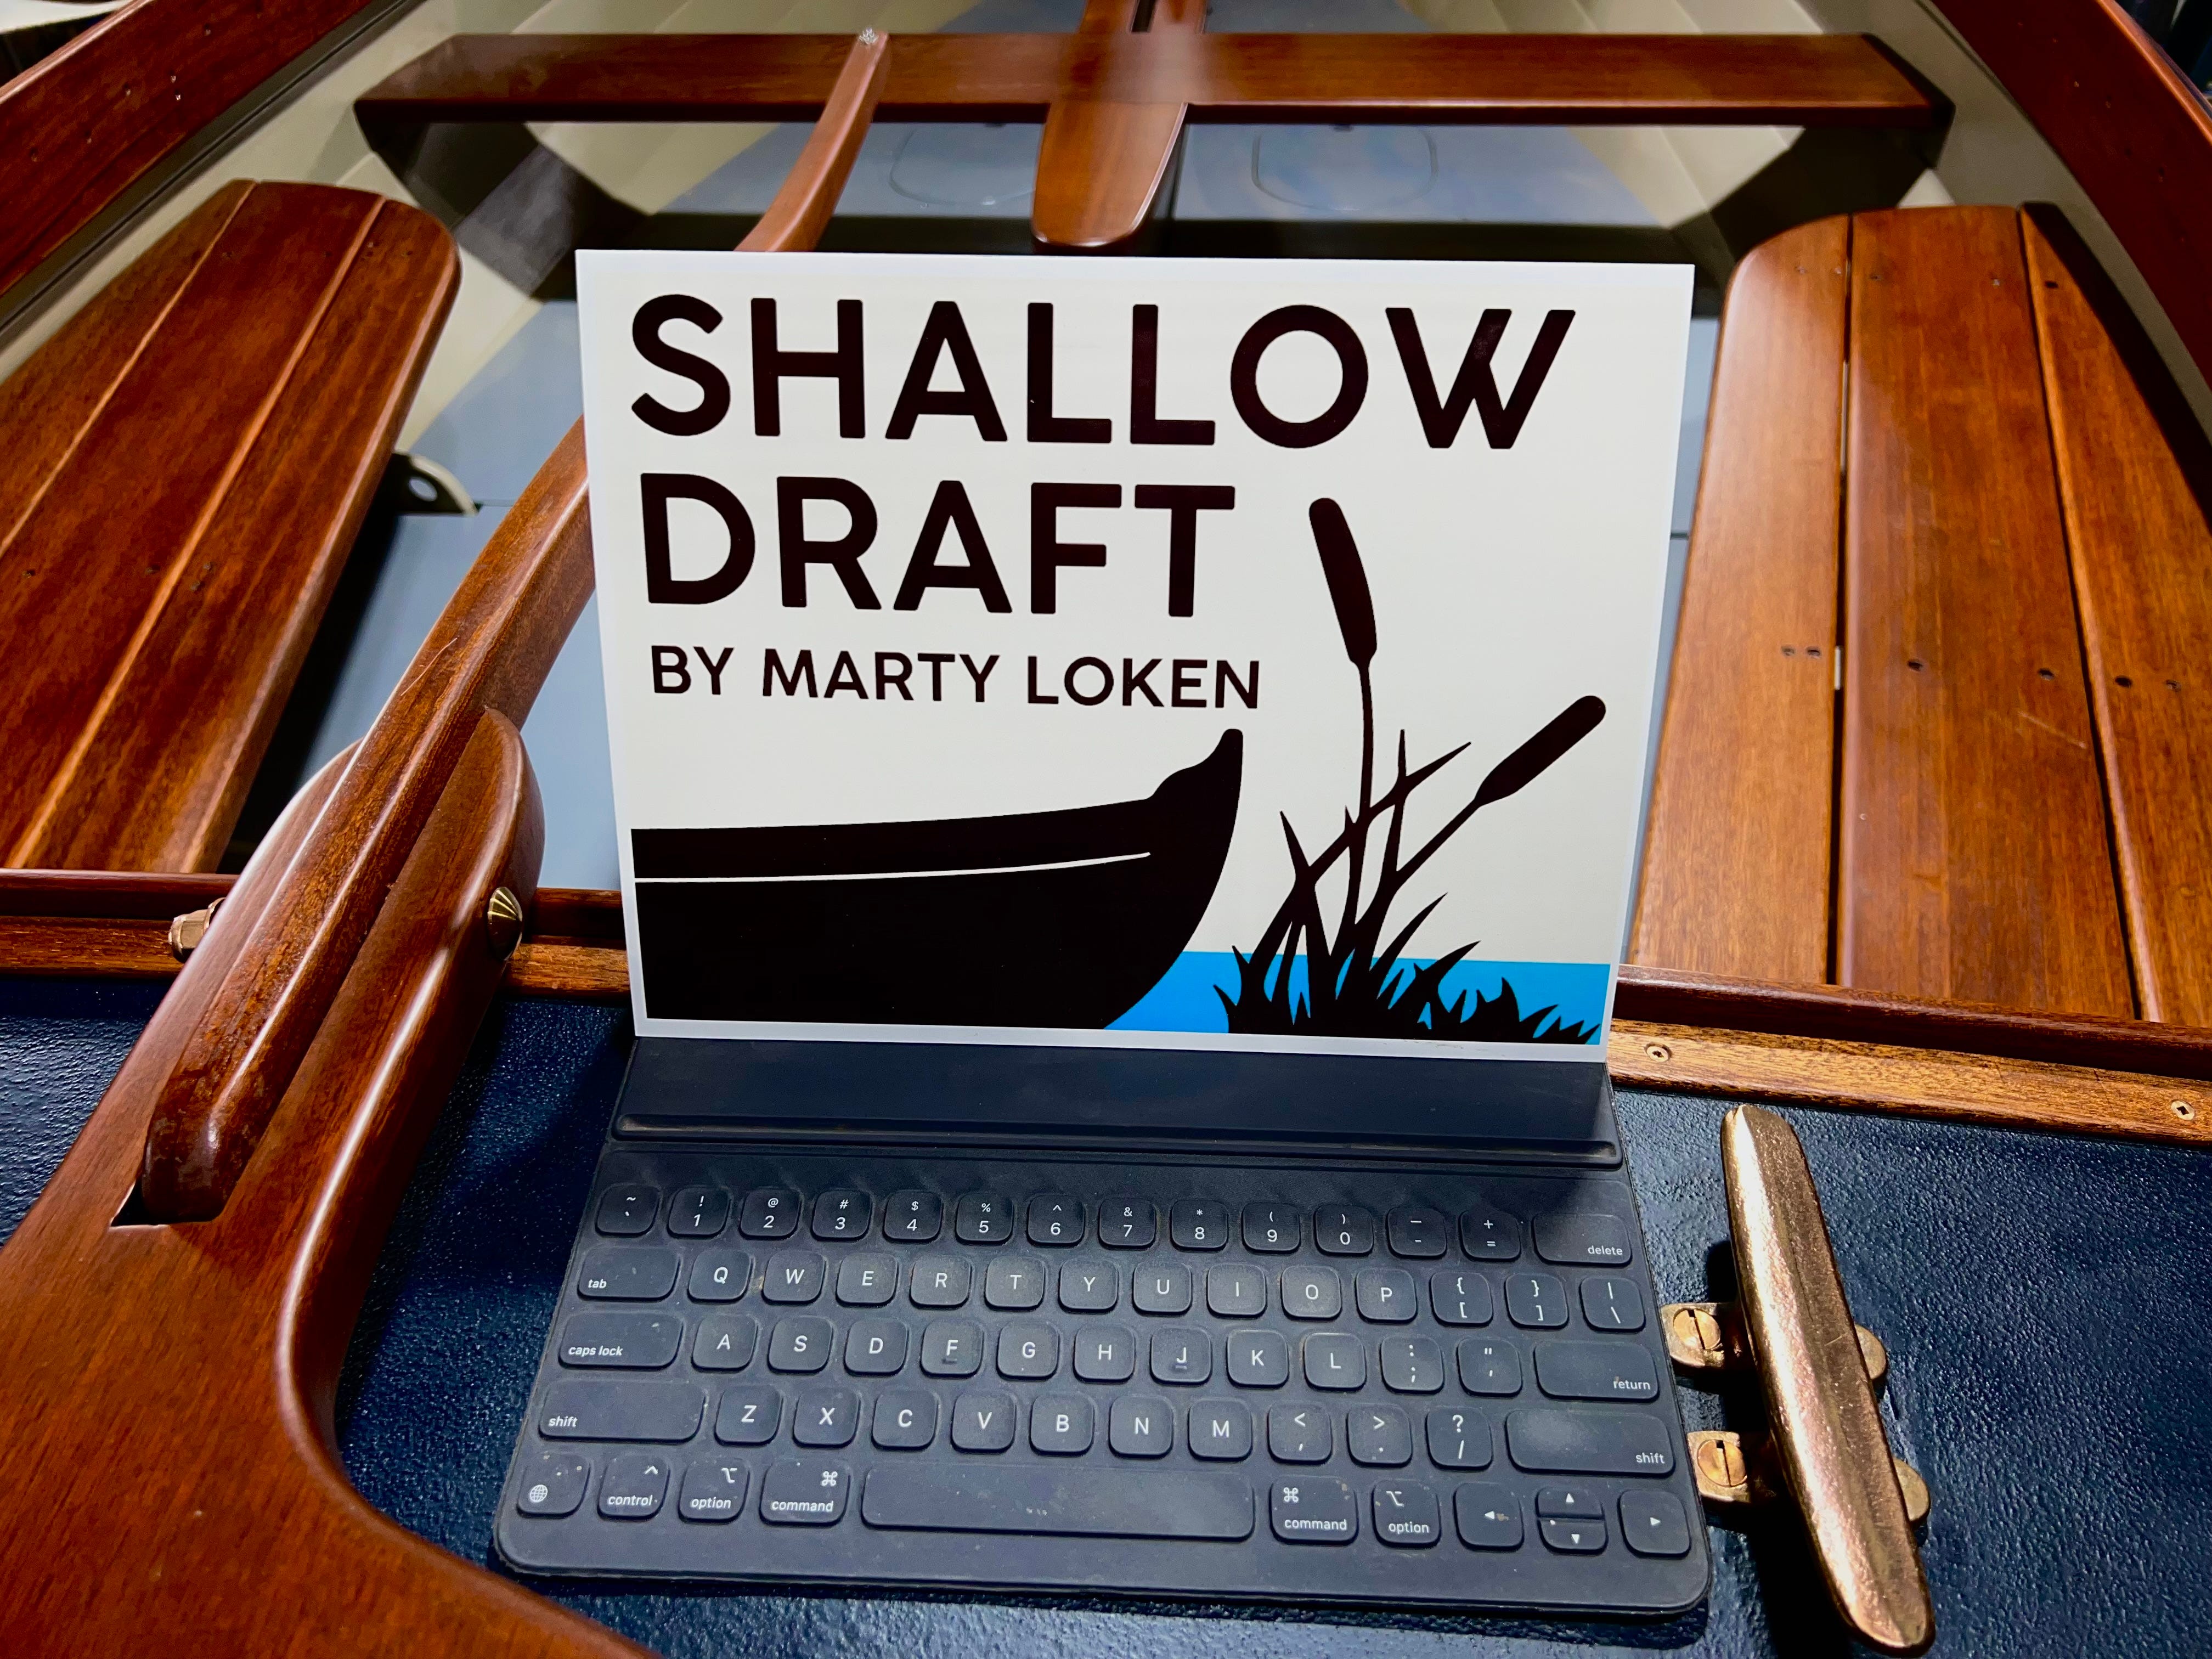 We Found Our Dreamboat Project! - Small Craft Advisor